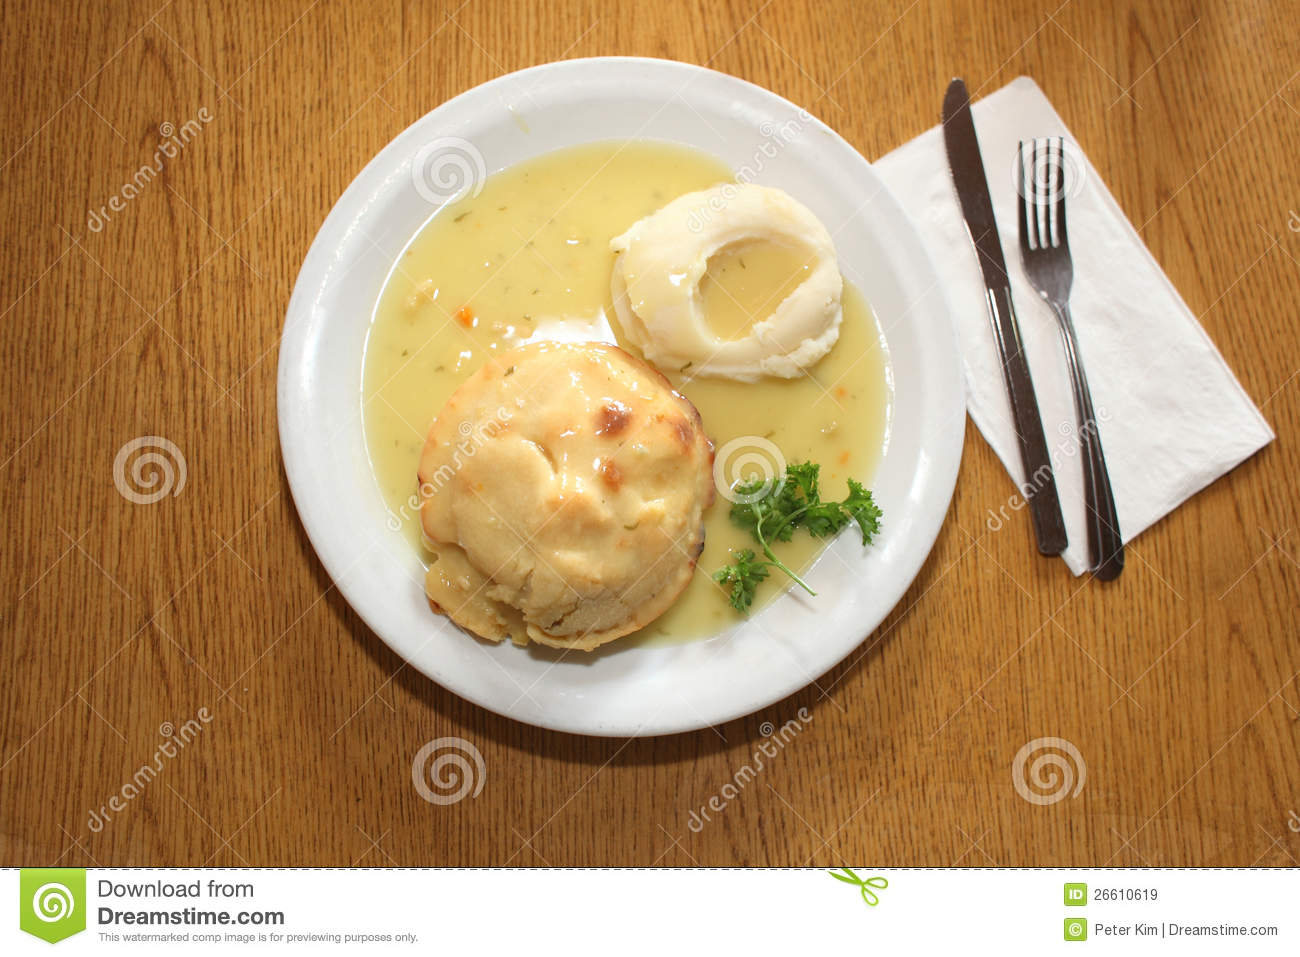 Chicken Pot Pie Royalty Free Stock Images   Image  26610619